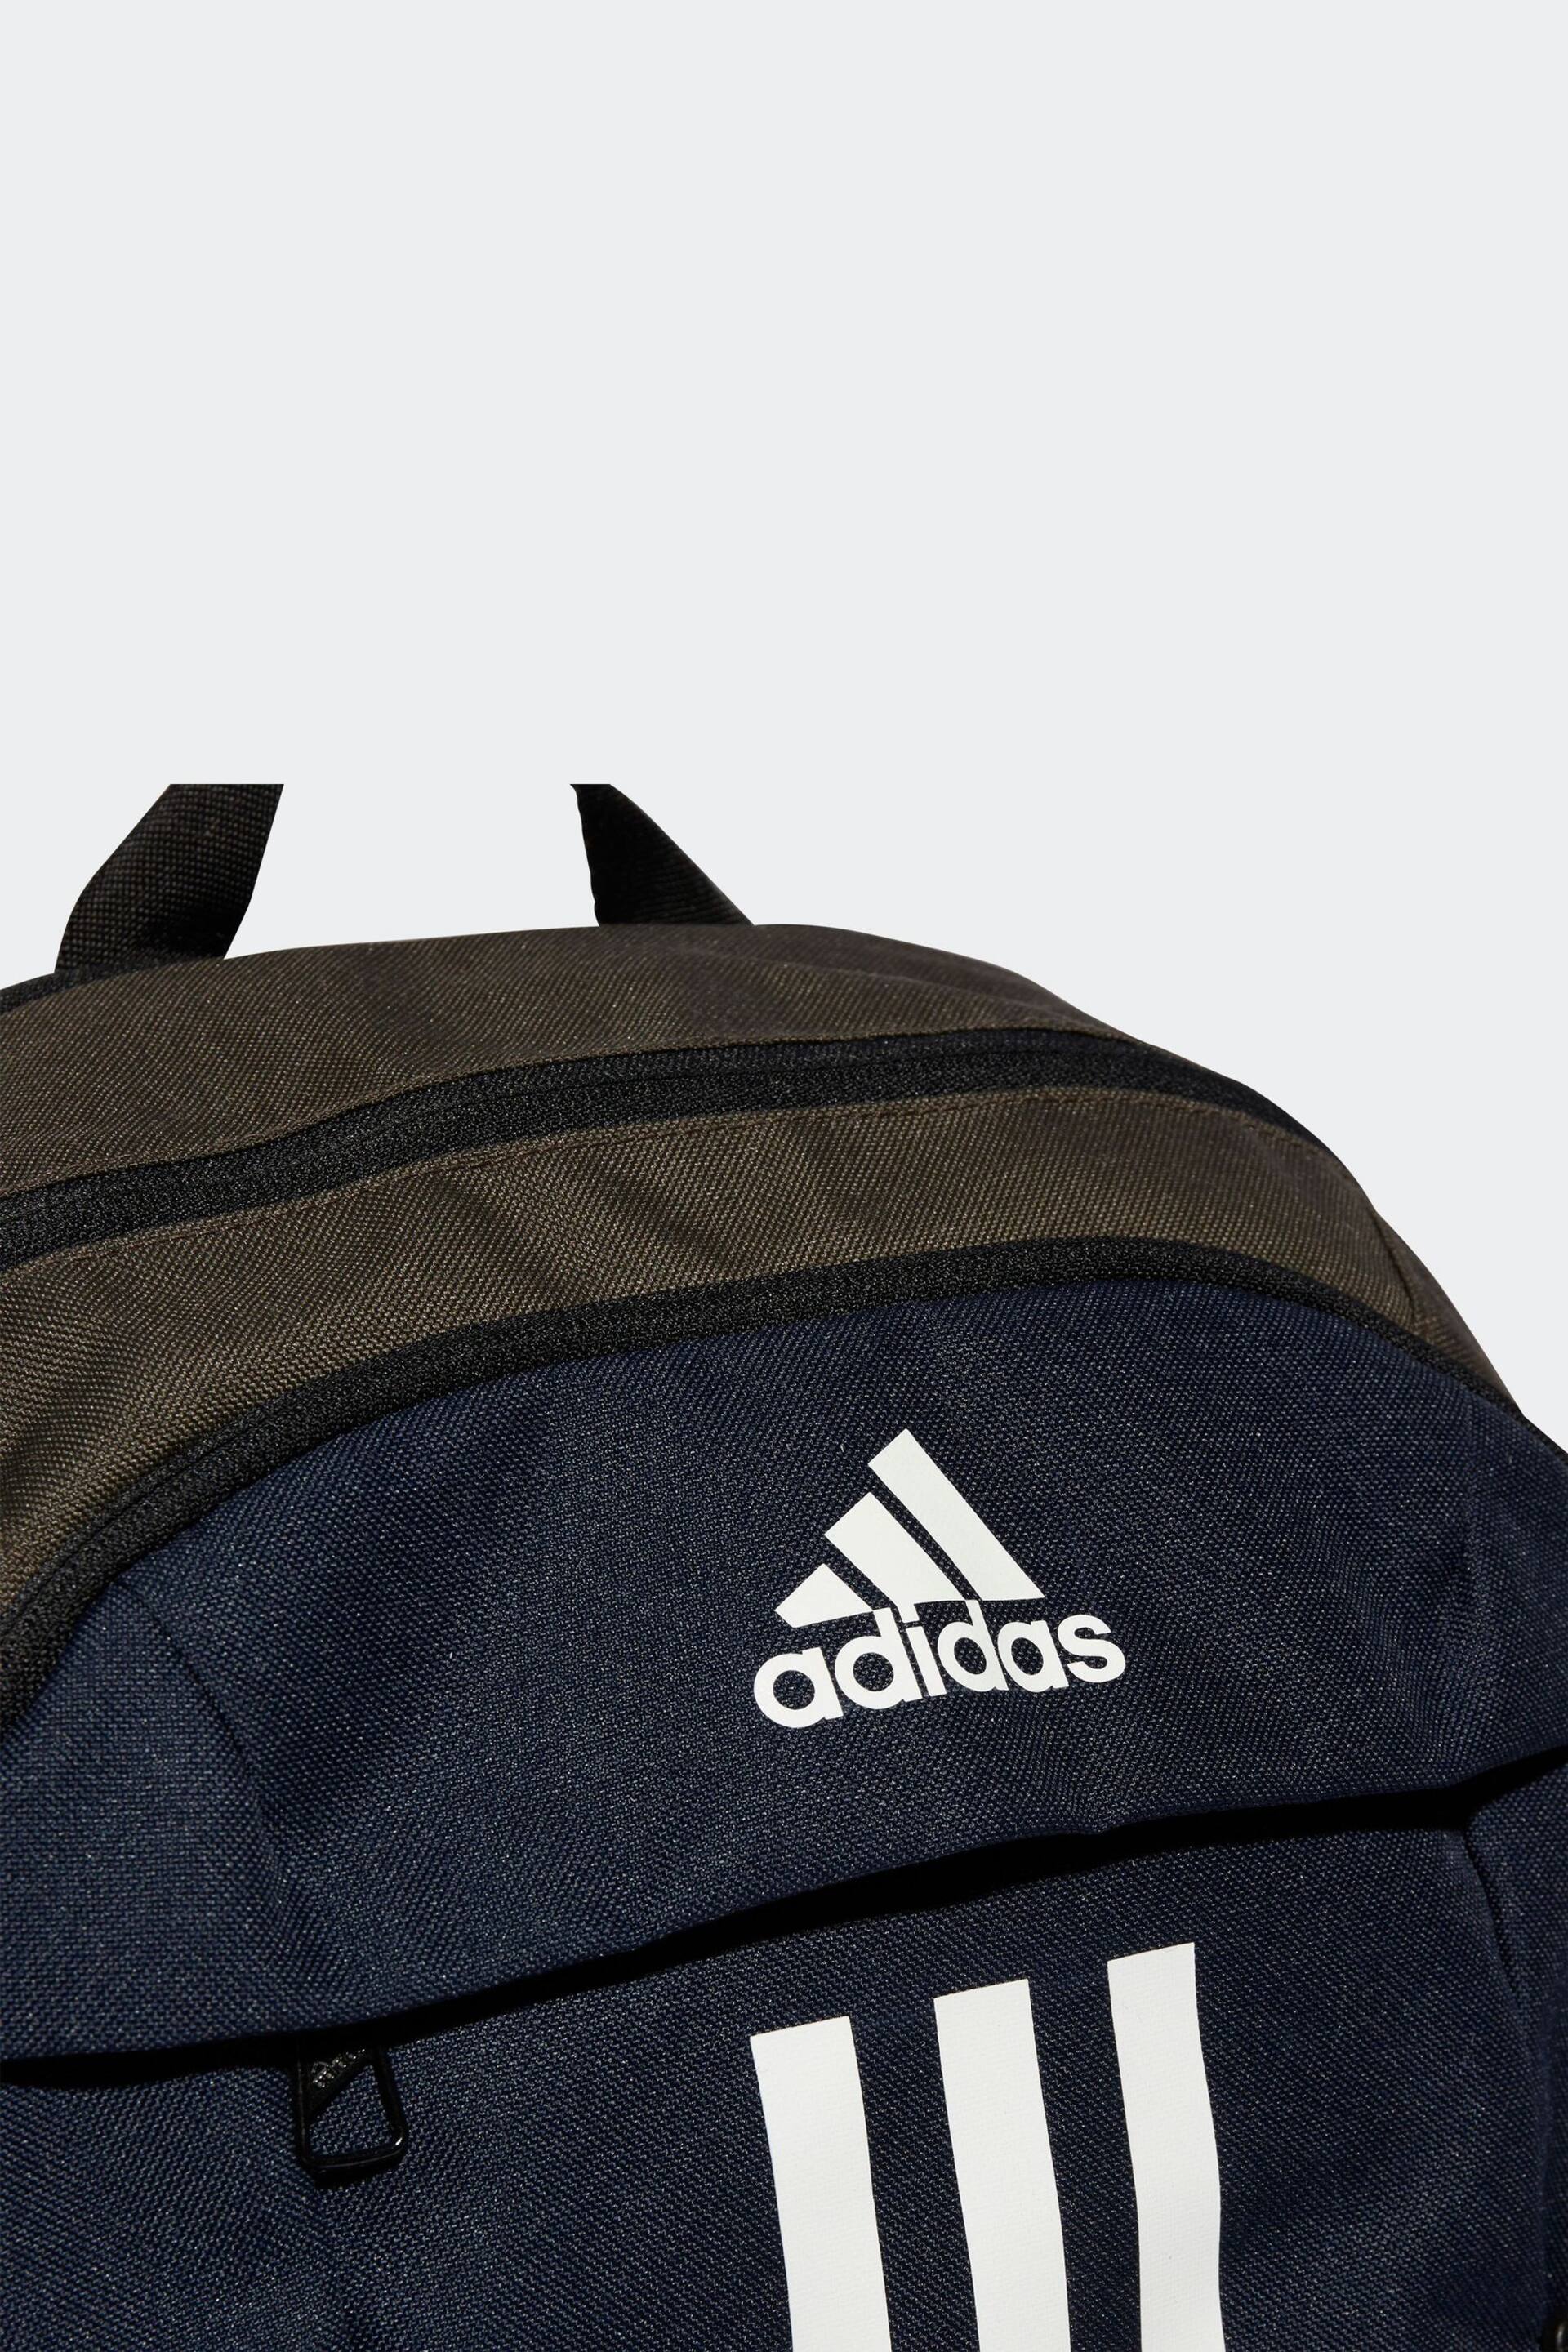 adidas Green Power Backpack - Image 5 of 6